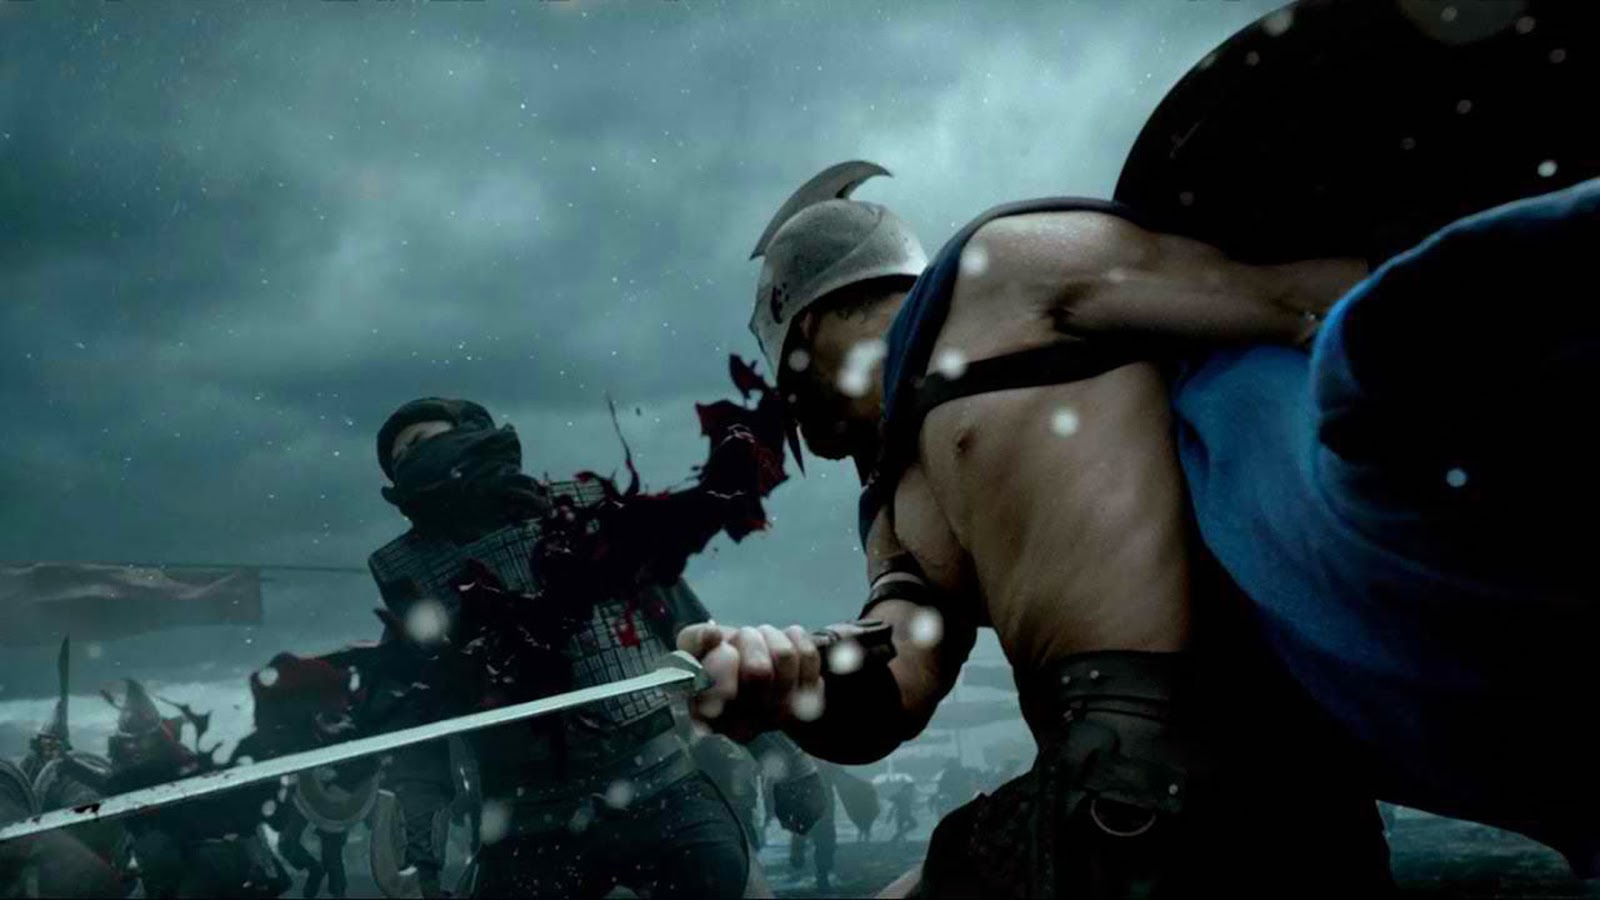 300 rise of an empire full movie hd download torrent kabum jogos xbox torrent